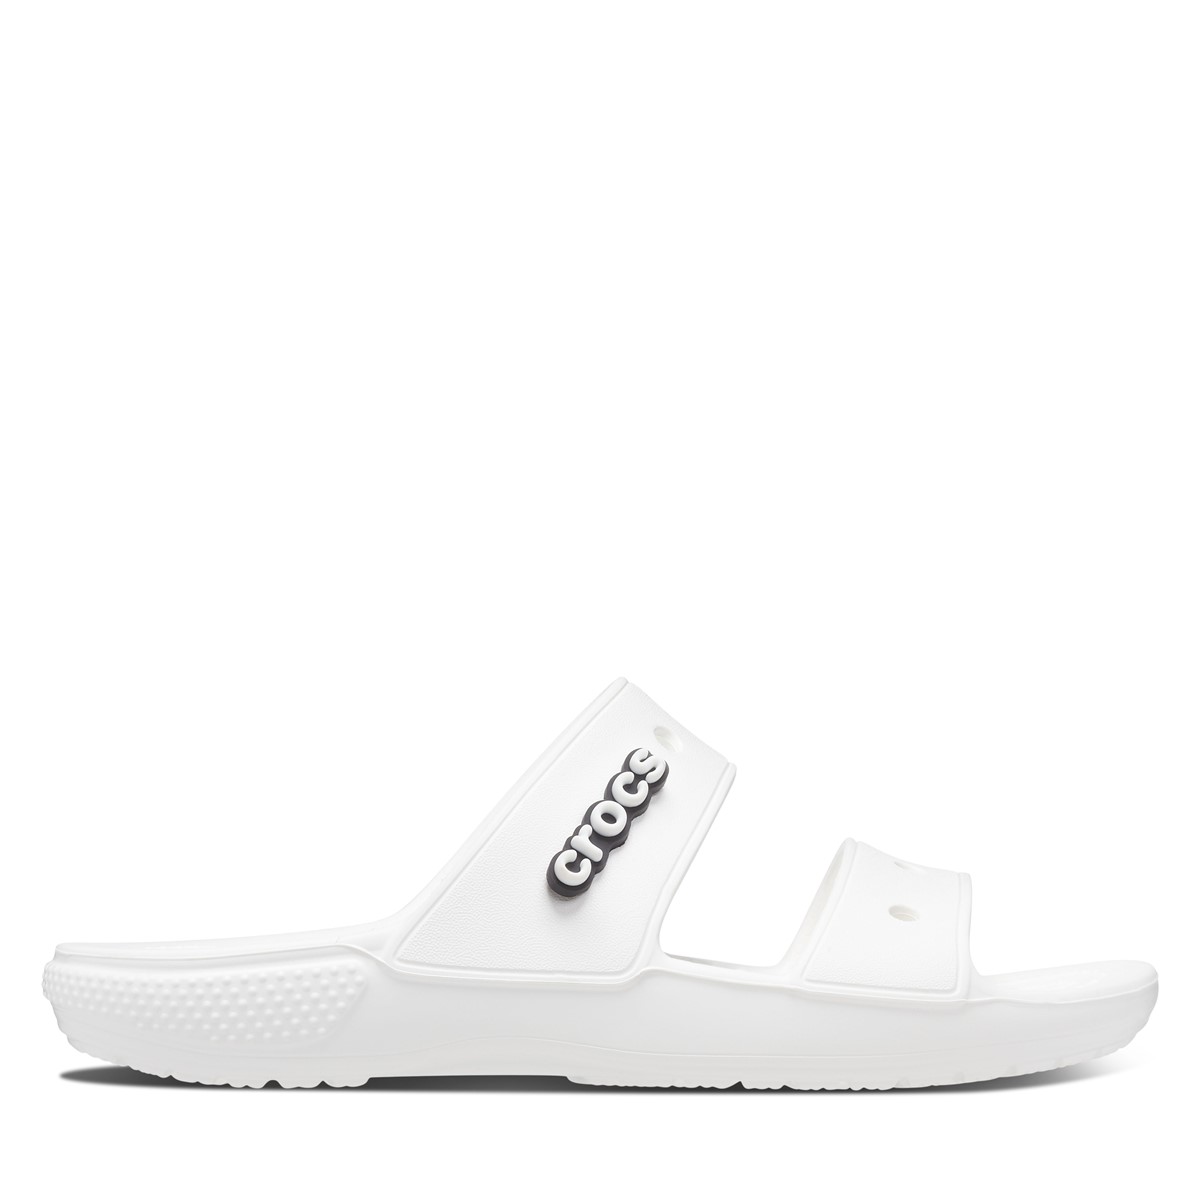 Classic Sandals in White